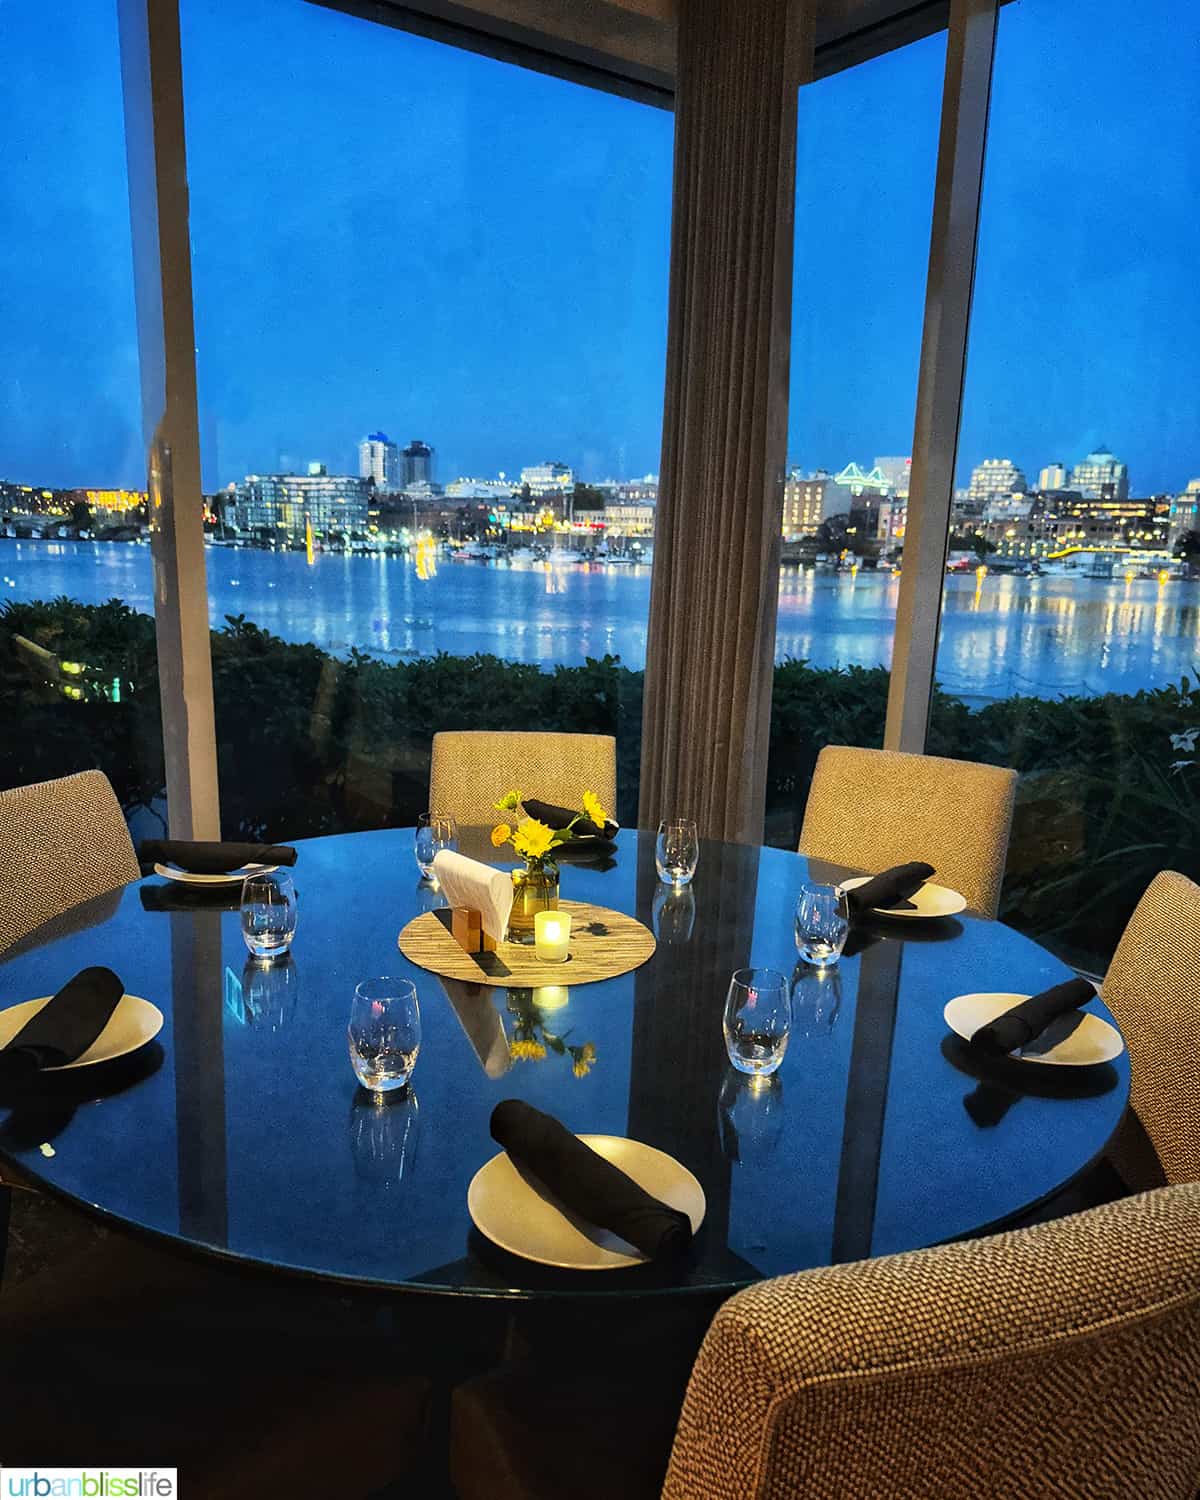 round dinner table and chairs with a view of Victoria Harbour at Aura restaurant inside the Inn at Laurel Point hotel.